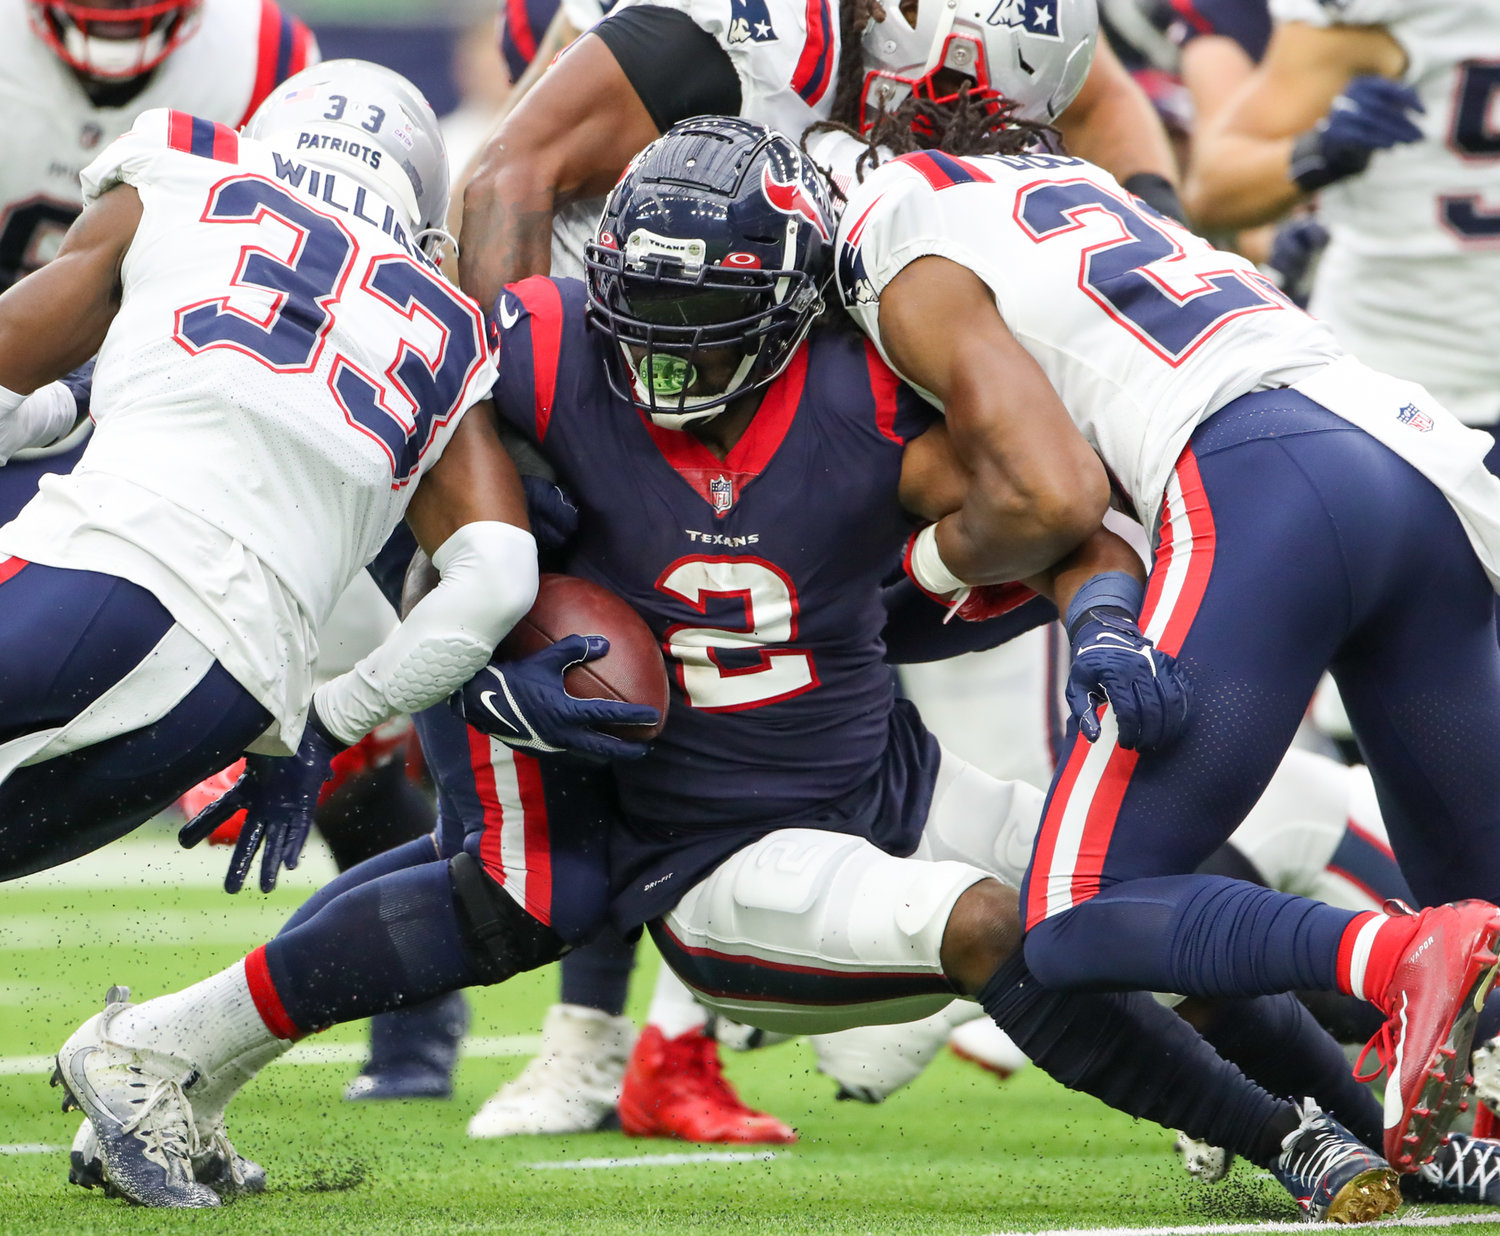 Houston Texans running back Mark Ingram (2) is bottled up on a carry during an NFL game between Houston and New England on October 10, 2021 in Houston, Texas. The Patriots won 25-22.